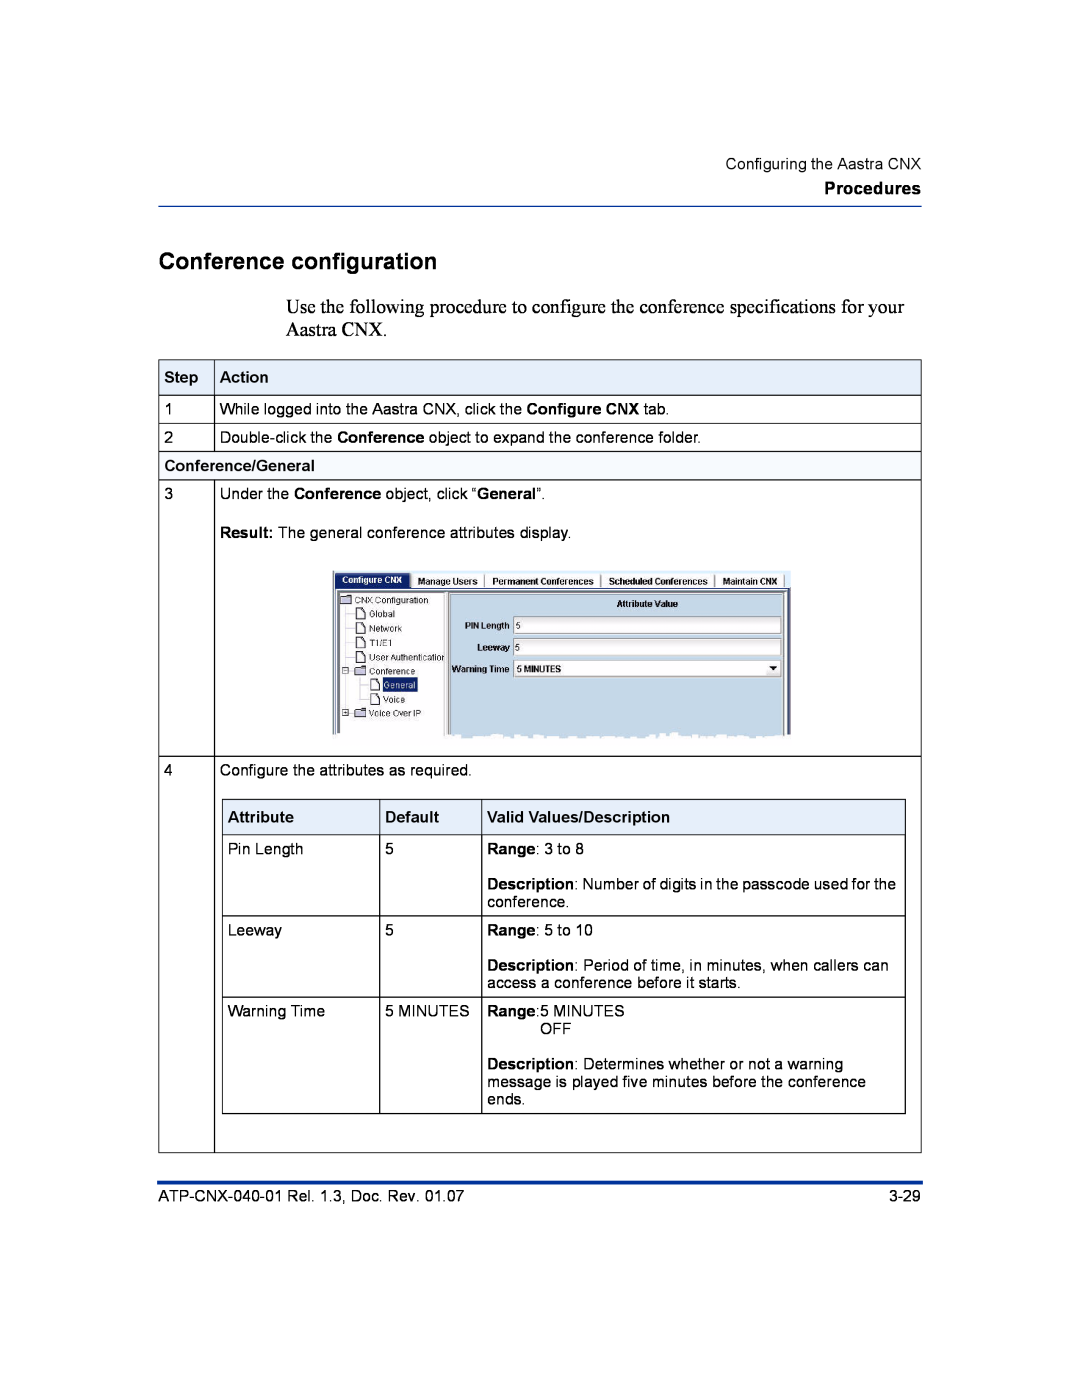 Aastra Telecom ATP-CNX-040-01 Conference configuration, Procedures, Step Action, Conference/General, Attribute, Default 